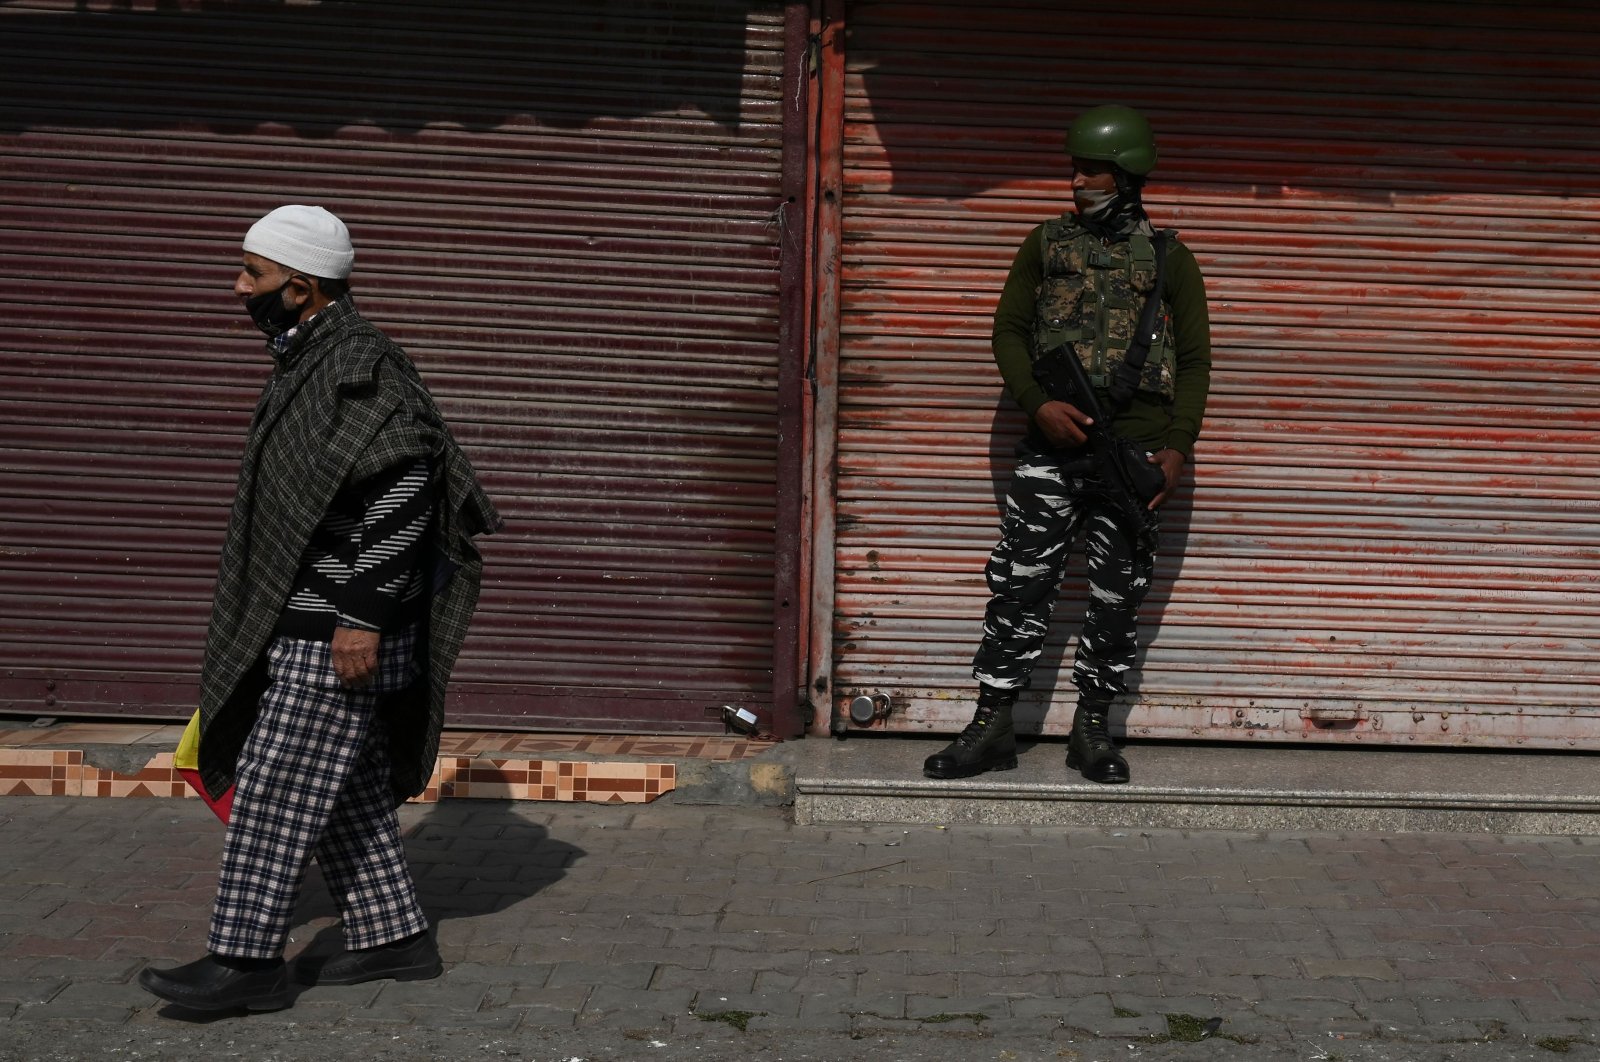 A resident walks past an Indian army soldier standing guard next to closed shops during a one-day strike called by the All Parties Hurriyat Conference (APHC) against the Indian government's decision to open Kashmir land for all Indians, in Srinagar on Oct. 31, 2020. (AFP Photo)